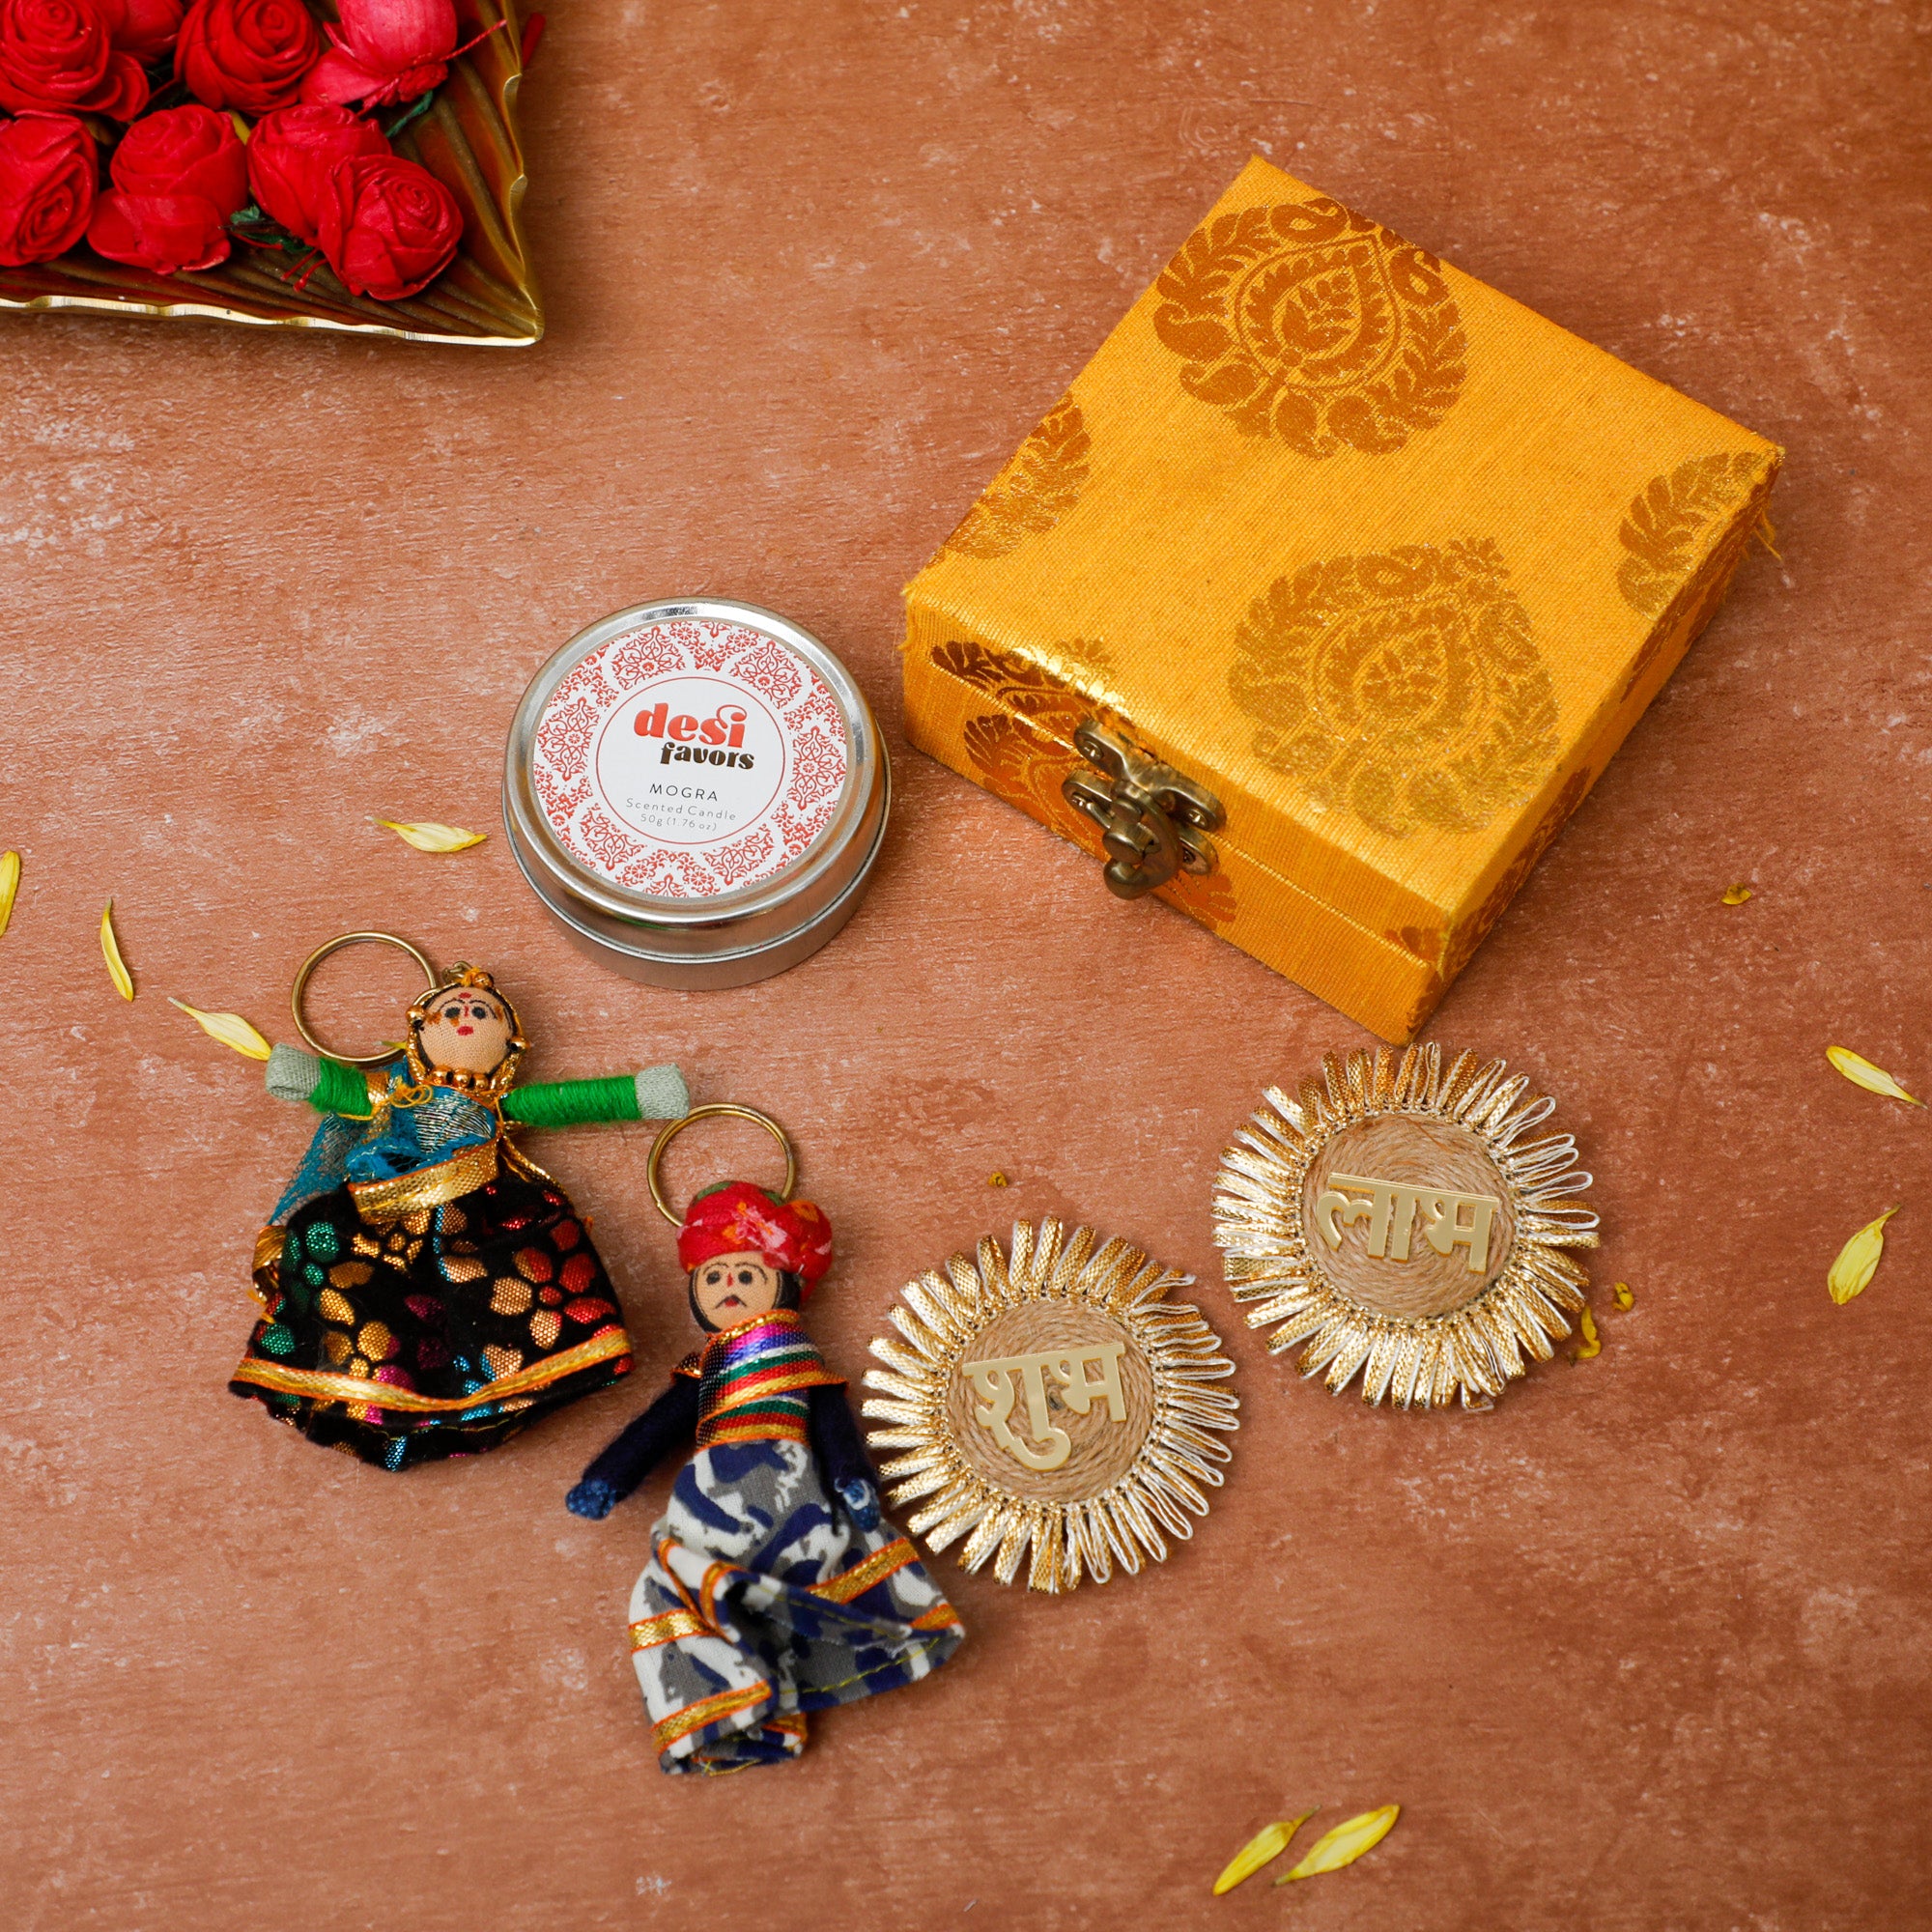 Couple Doll and Gift Items Arranged in a Shop in South India Stock Image -  Image of traditional, handicraft: 274299603